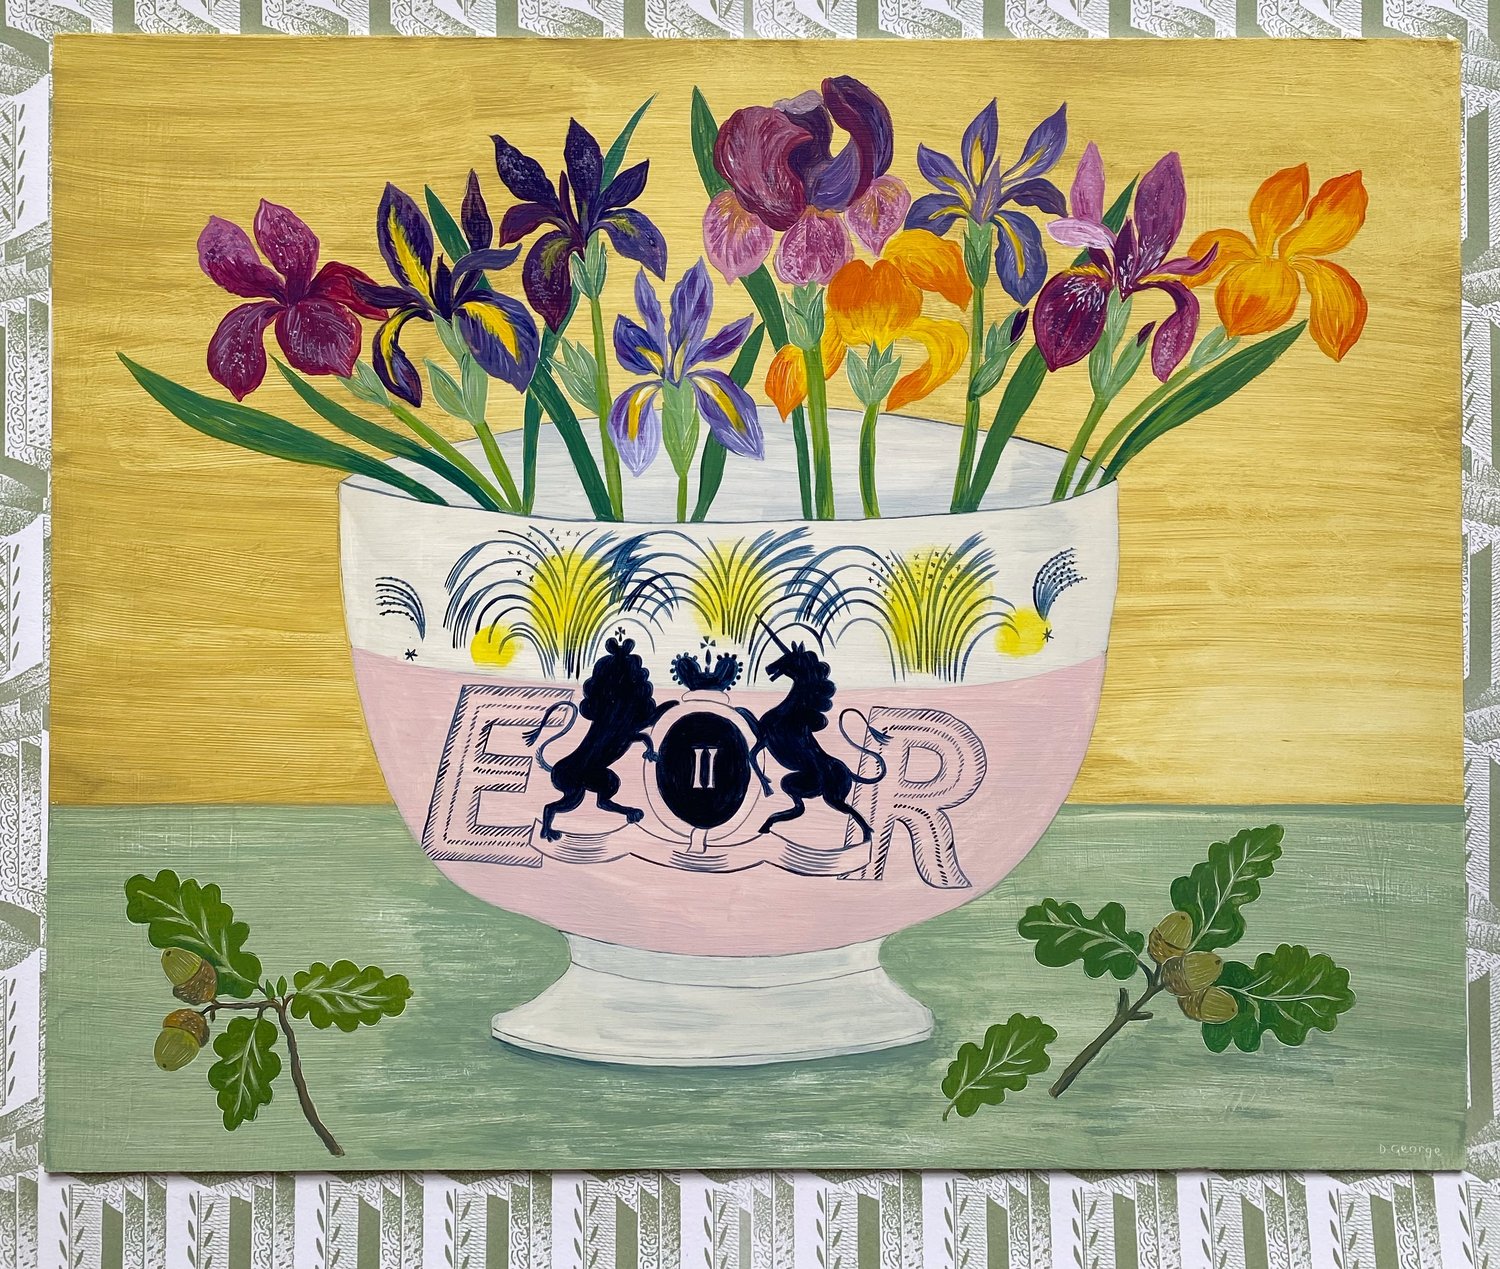 Image of Jubilee bowl and Irises